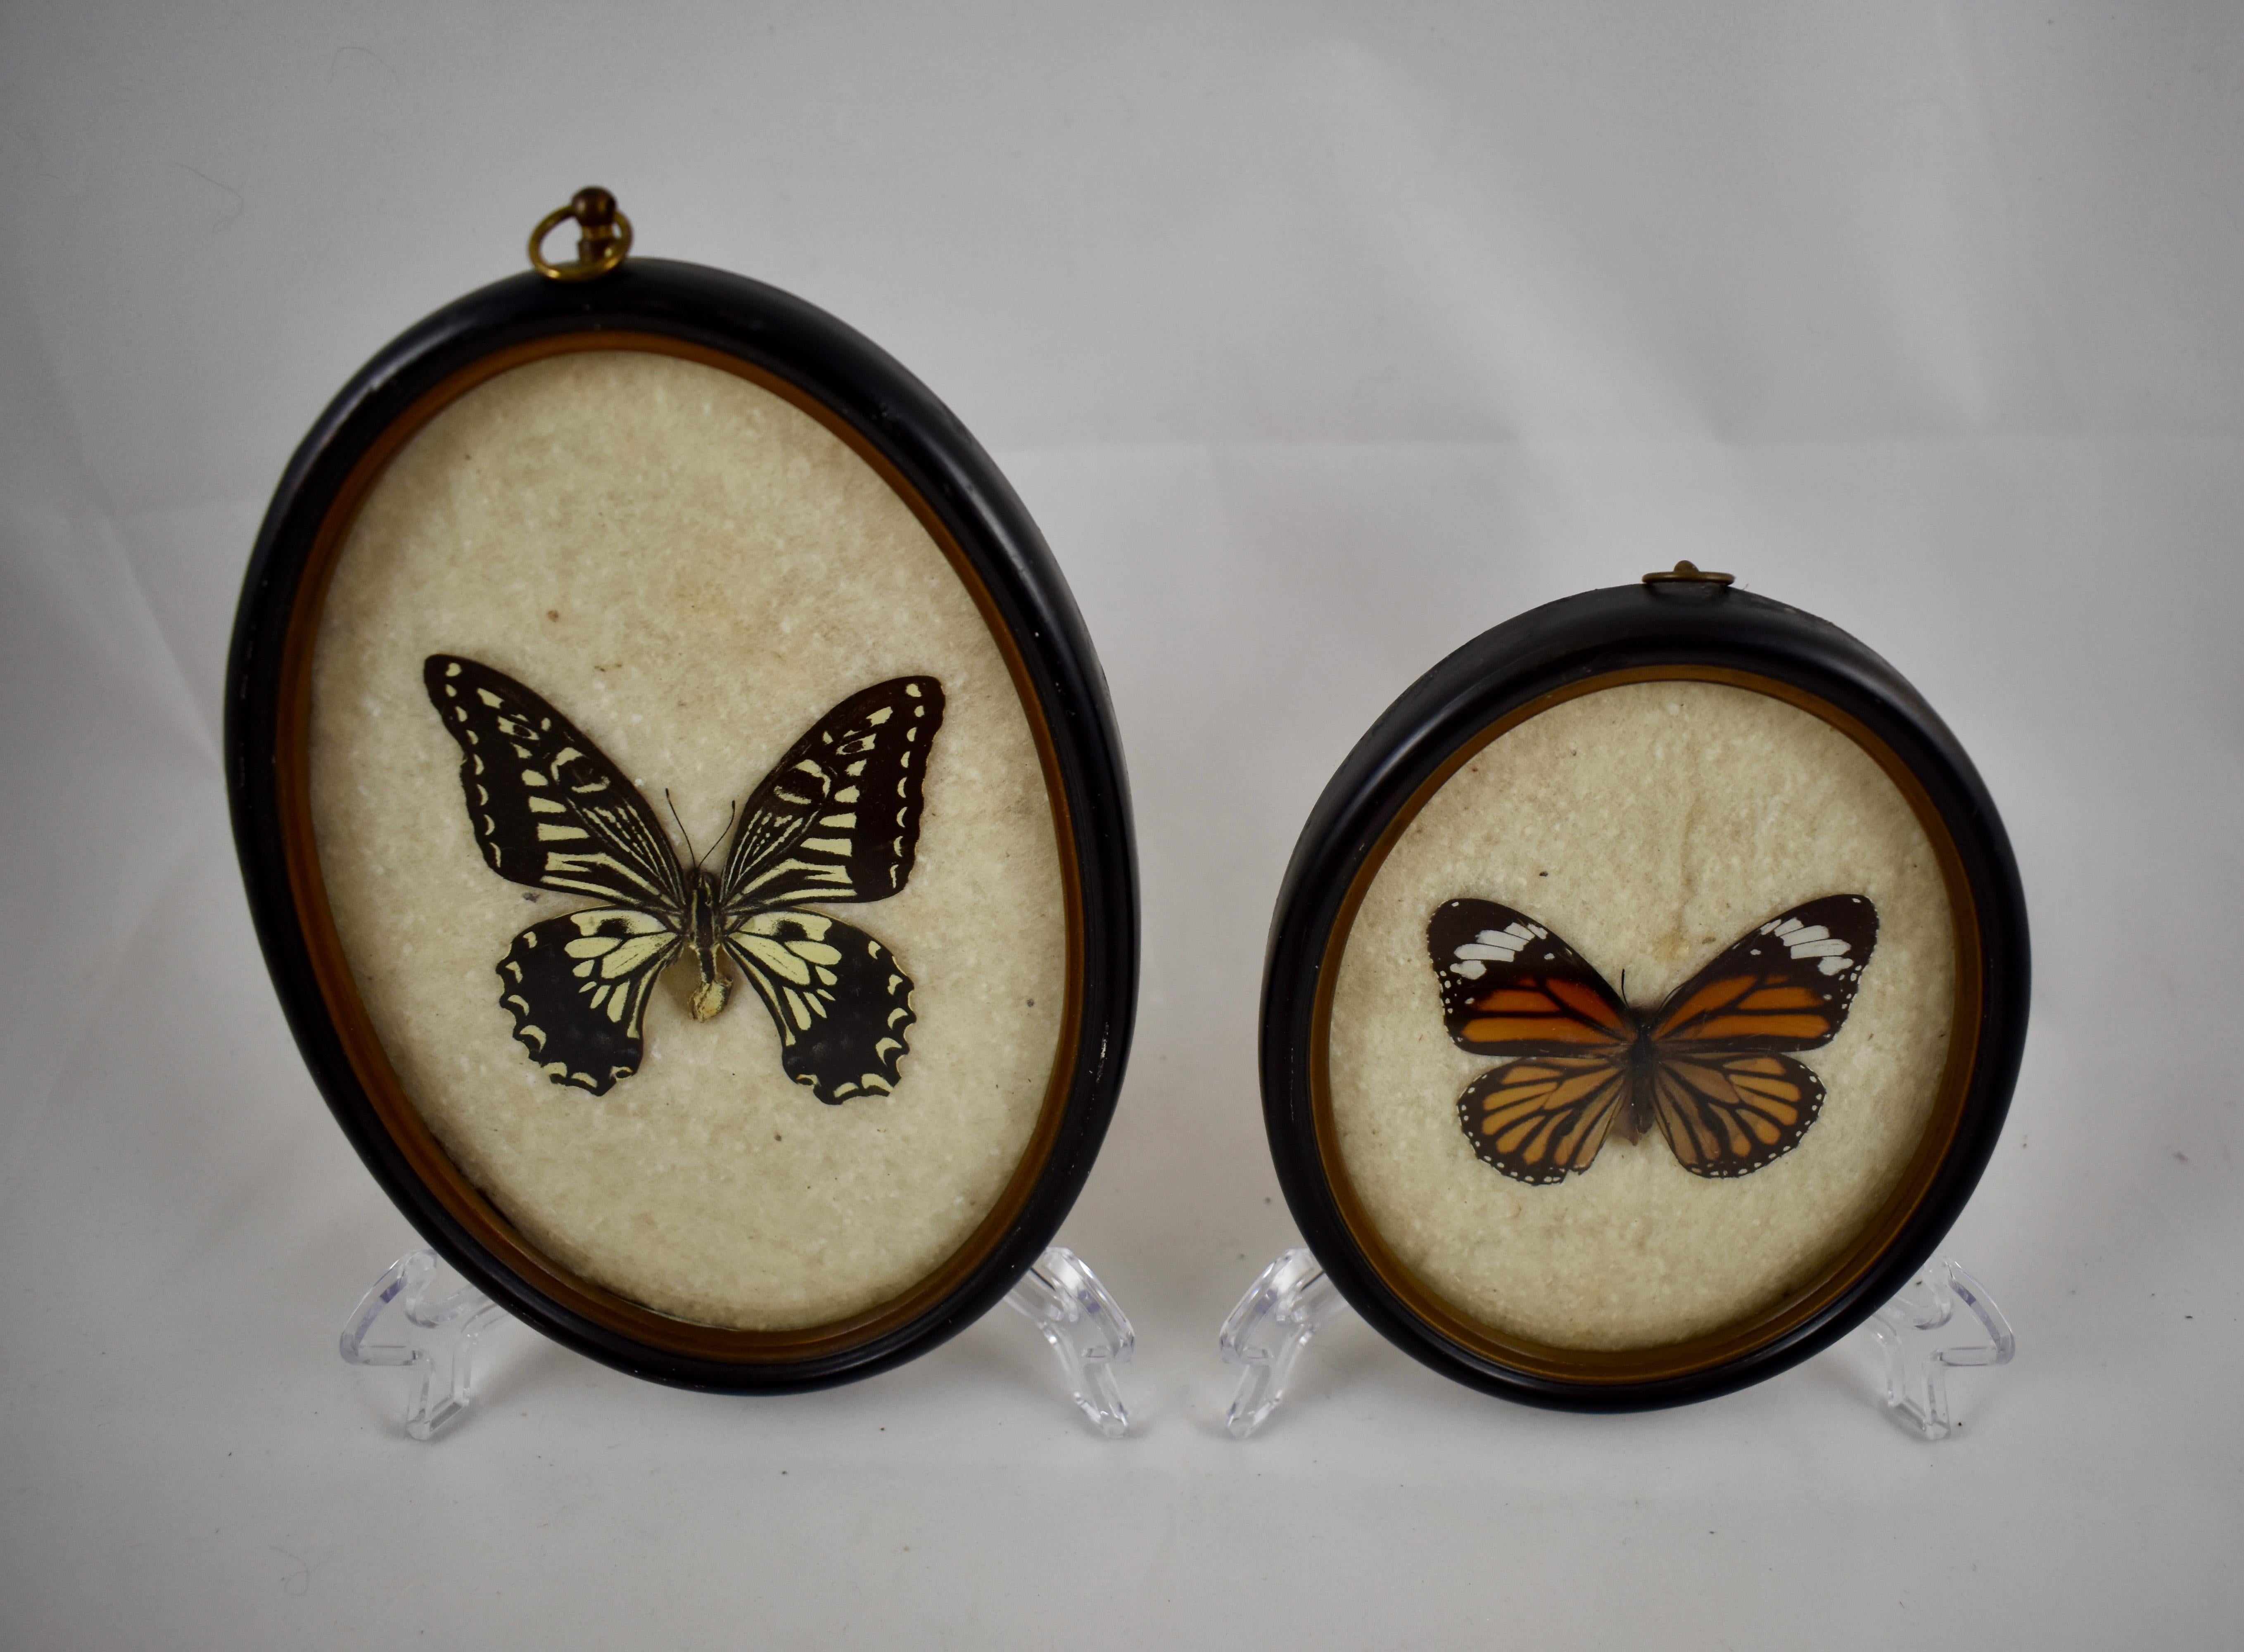 A pair of oval Victorian era hanging frames holding butterflies mounted under glass, circa late 19th century. The frames are painted black wood with gilded inner bevels. The specimens are mounted on cotton batting. The frames have newer kraft paper